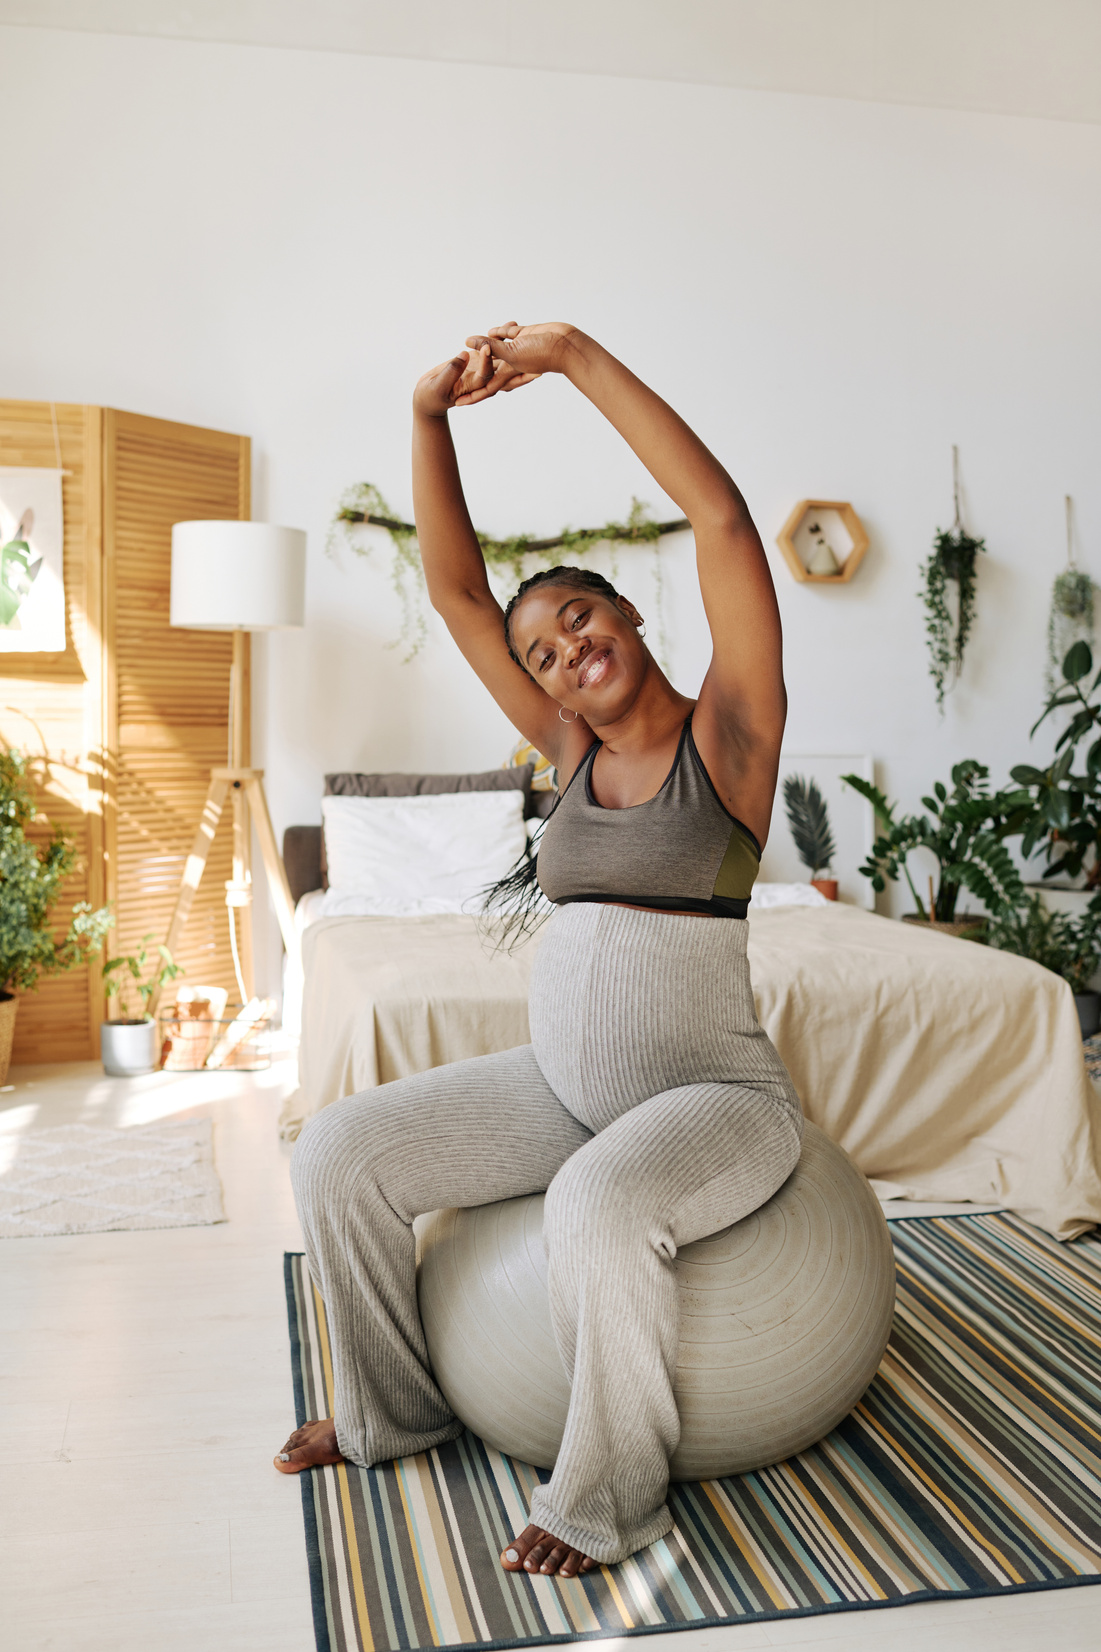 Pregnant Woman Exercising on Fitness Ball at Home